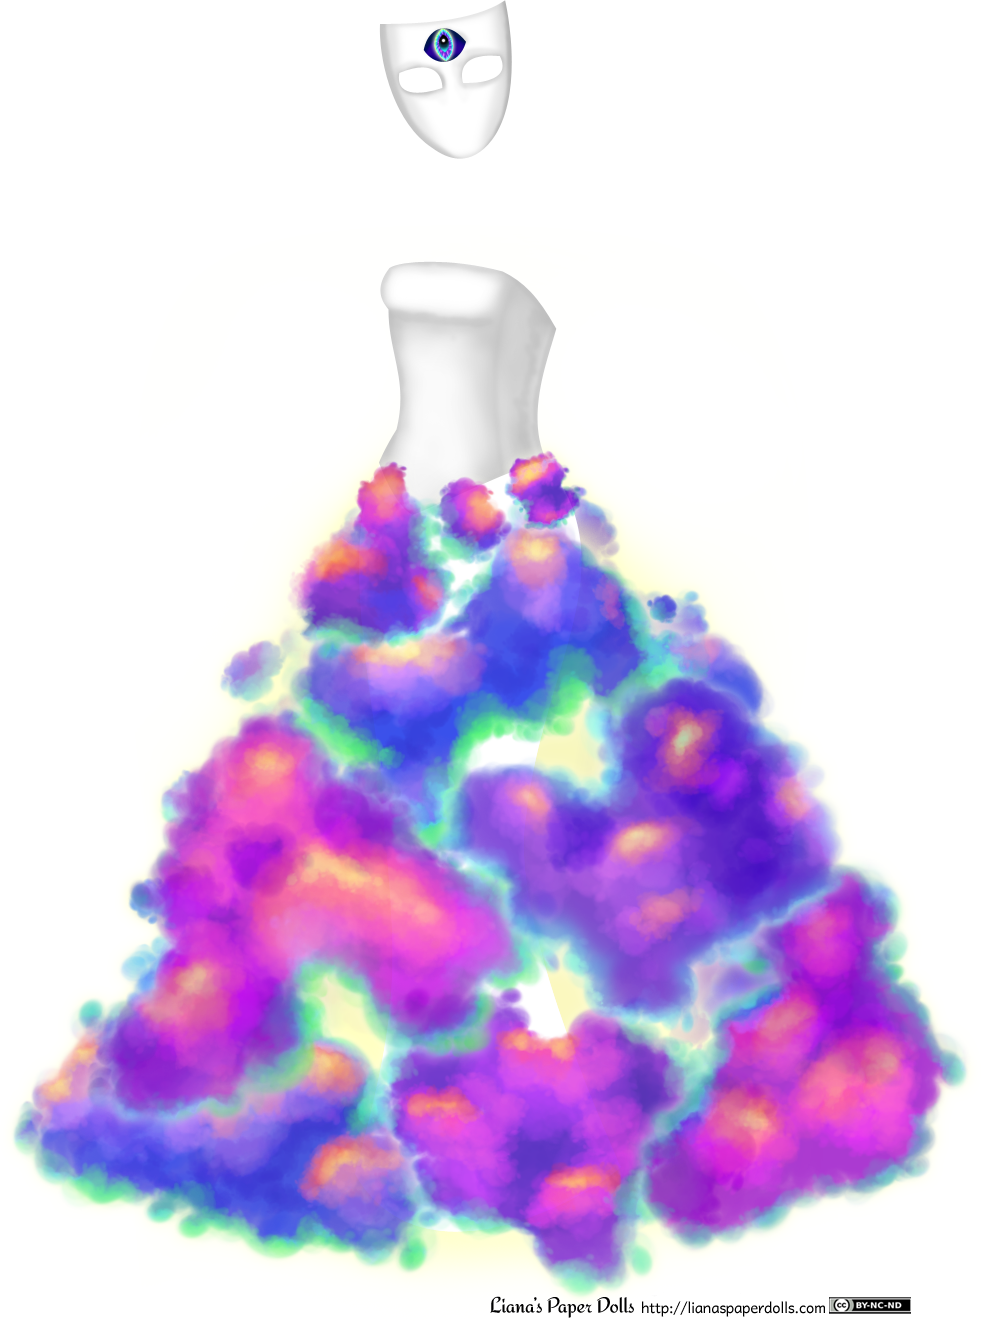 A White Object With Colorful Smoke